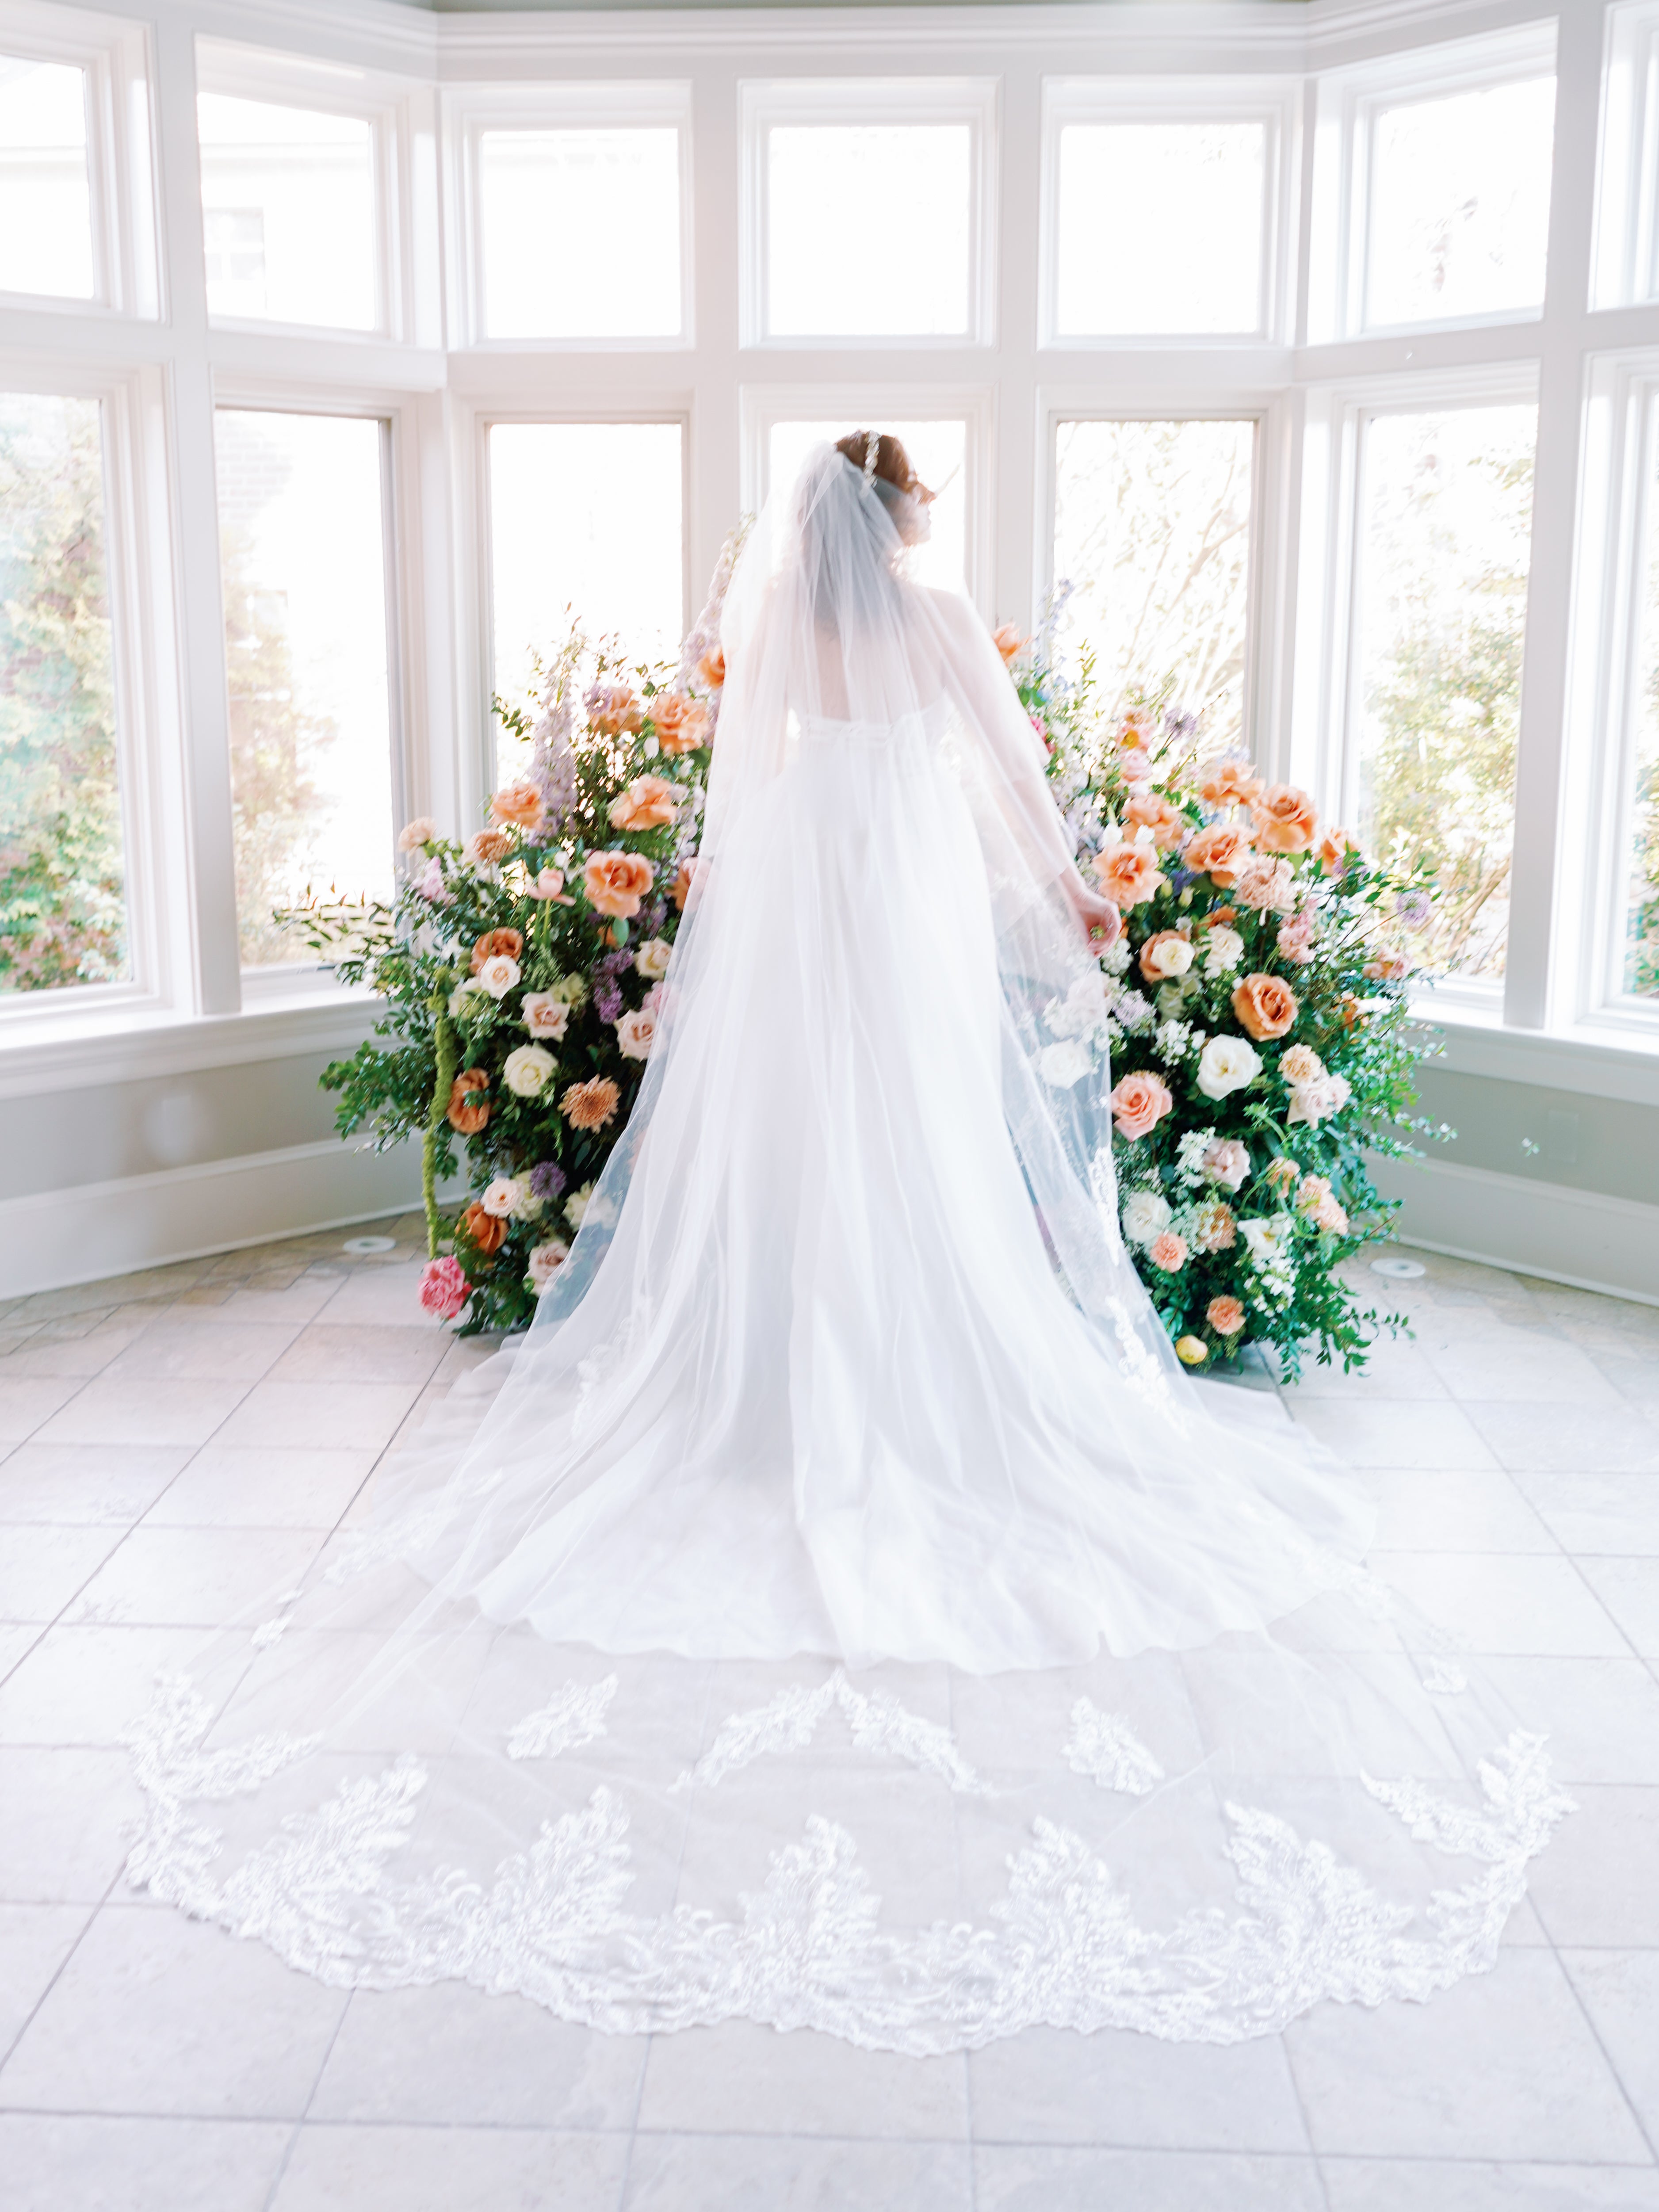 Royal Cathedral Wedding Veil Drop Veil | Eden Luxe Bridal Blush / No Comb Attached - Veil Pins Included